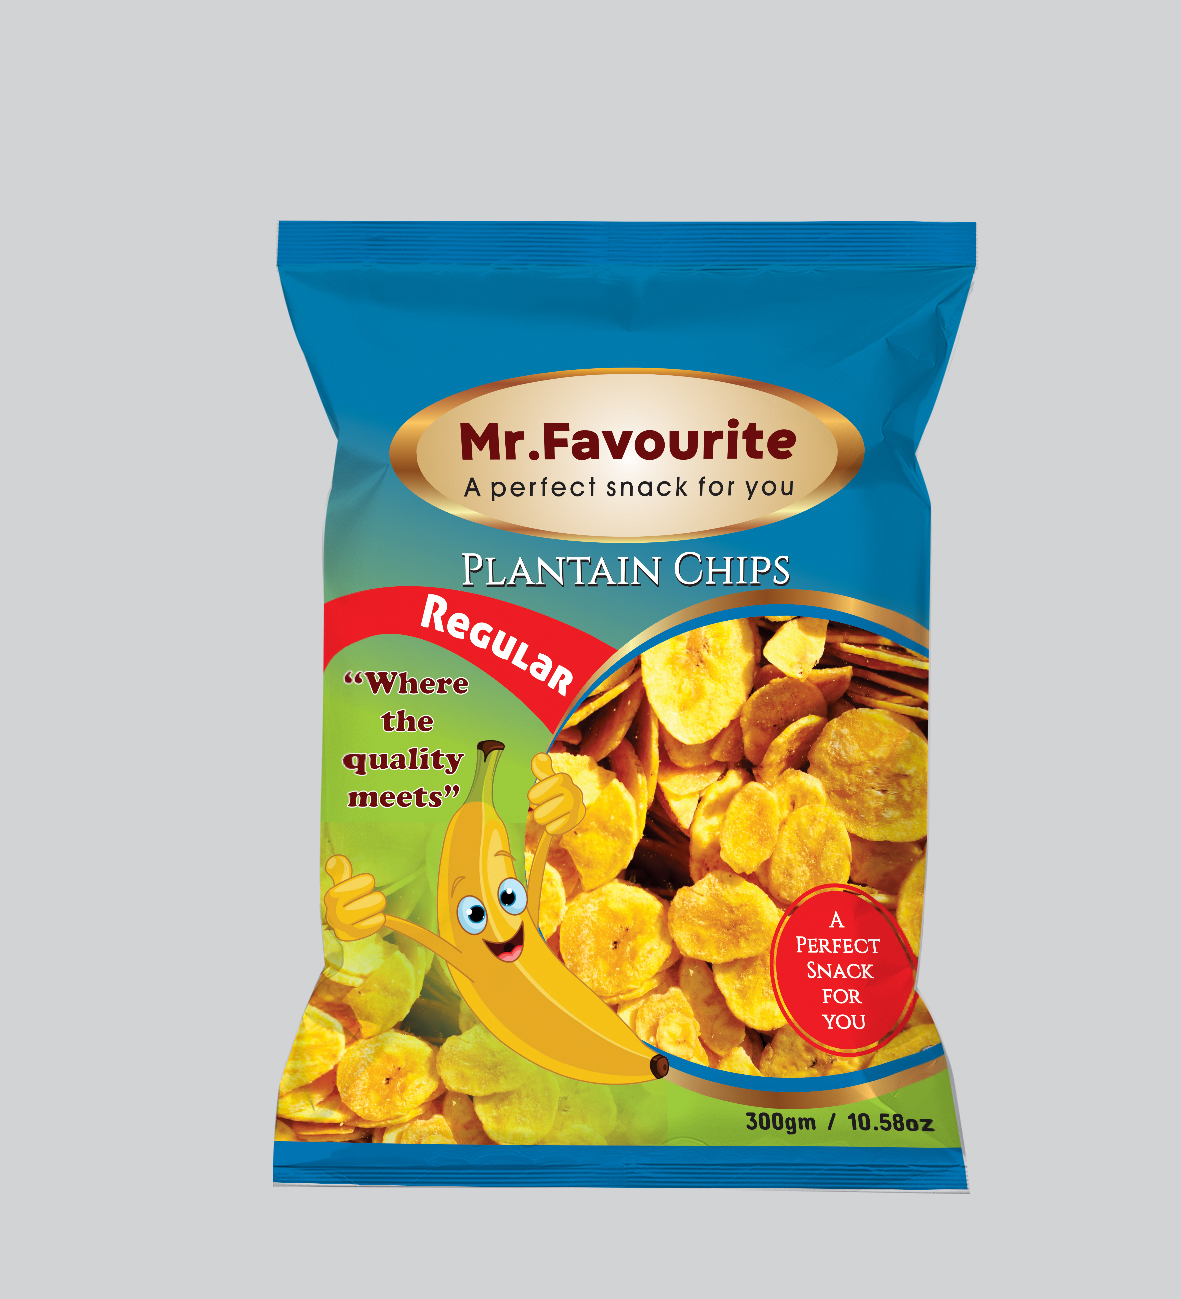 Mr. Favourite plantain chips are 100 percent vegan, gluten-free, and trans fat-free. Plantains, a type of banana, are believed to have originated from Southeast Asia, although other sources place them in eastern Africa as early as 3000 BCs.

